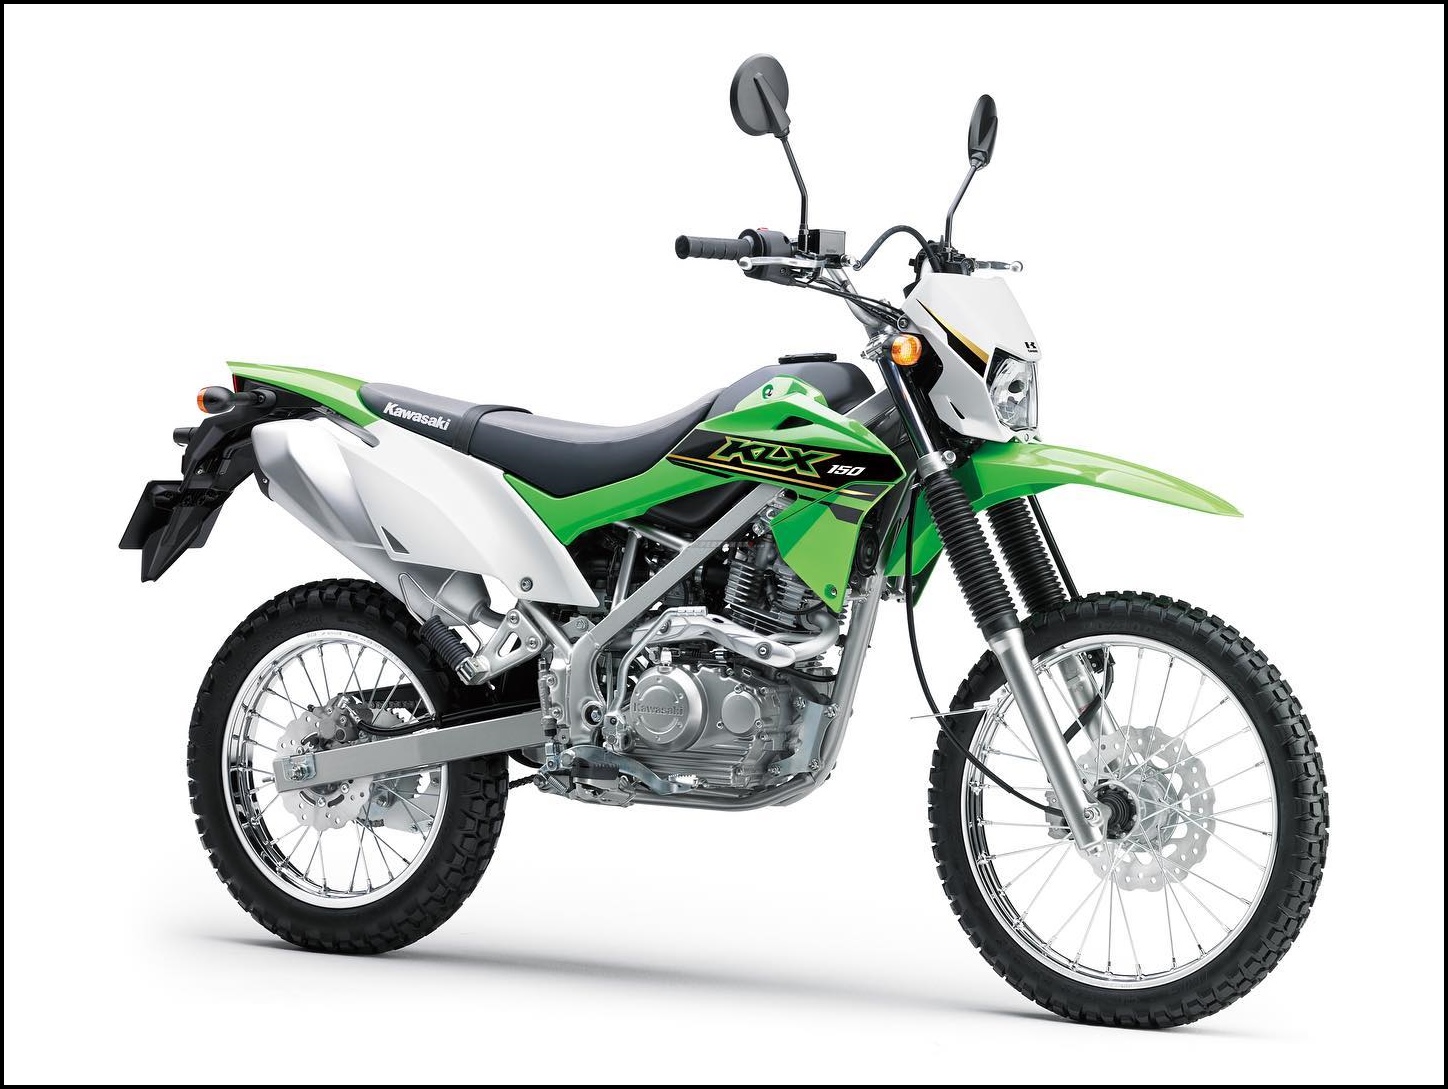 Kawasaki KLX 150  gets new colour options in Indonesia for 